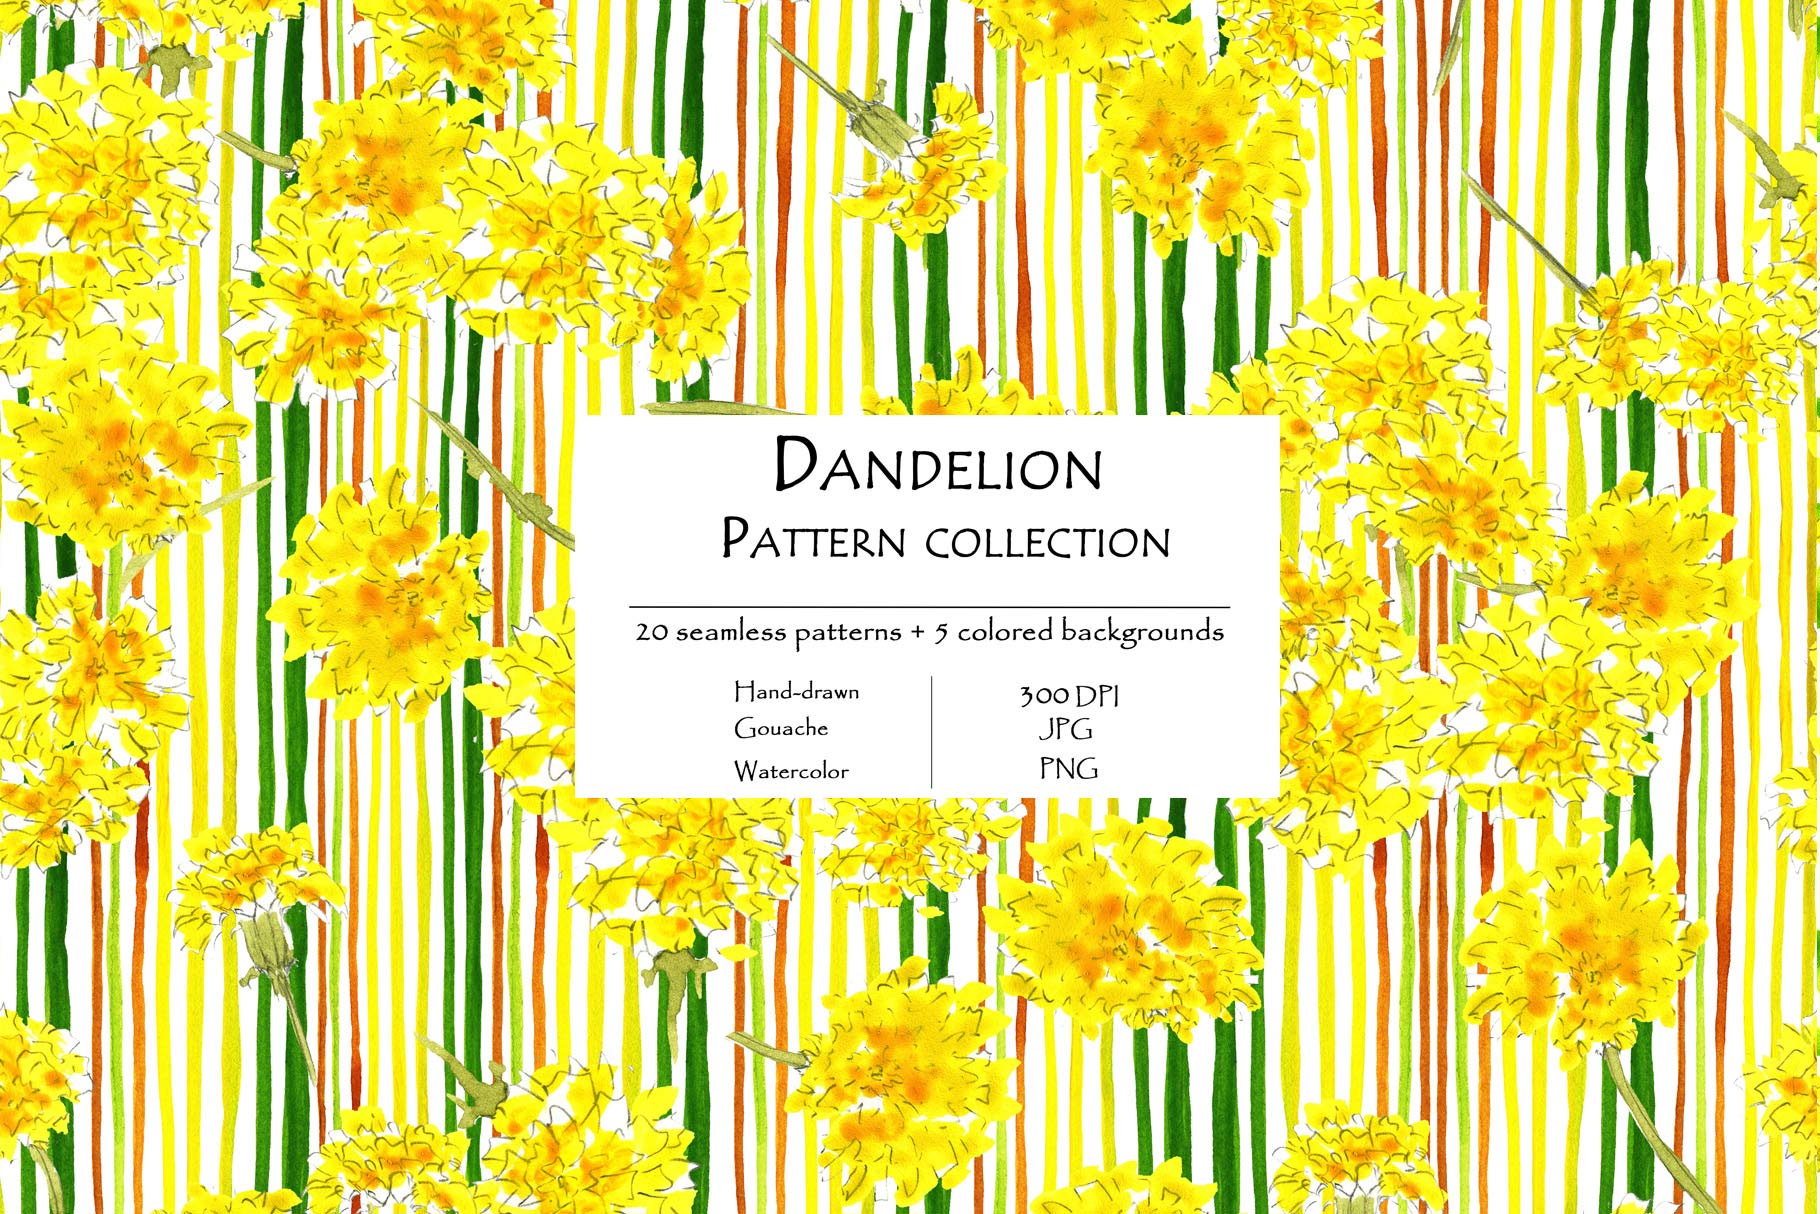 Dandelion Pattern Collection Of 20 Seamless Patterns And 5 Colored Background Striped Background.